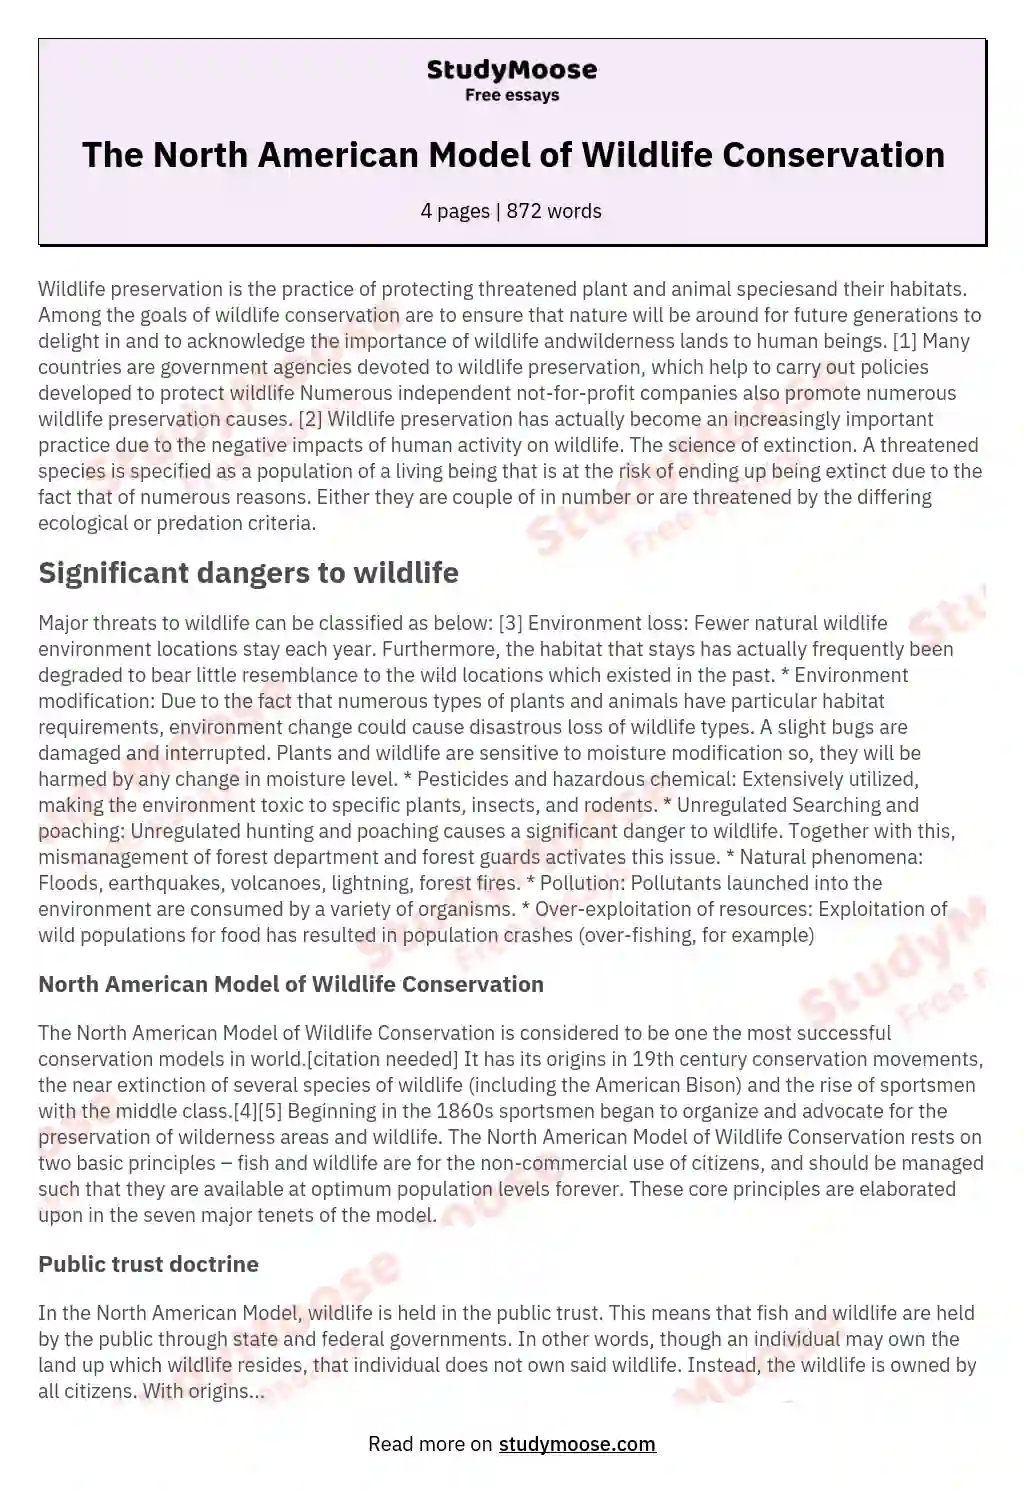 The North American Model of Wildlife Conservation essay